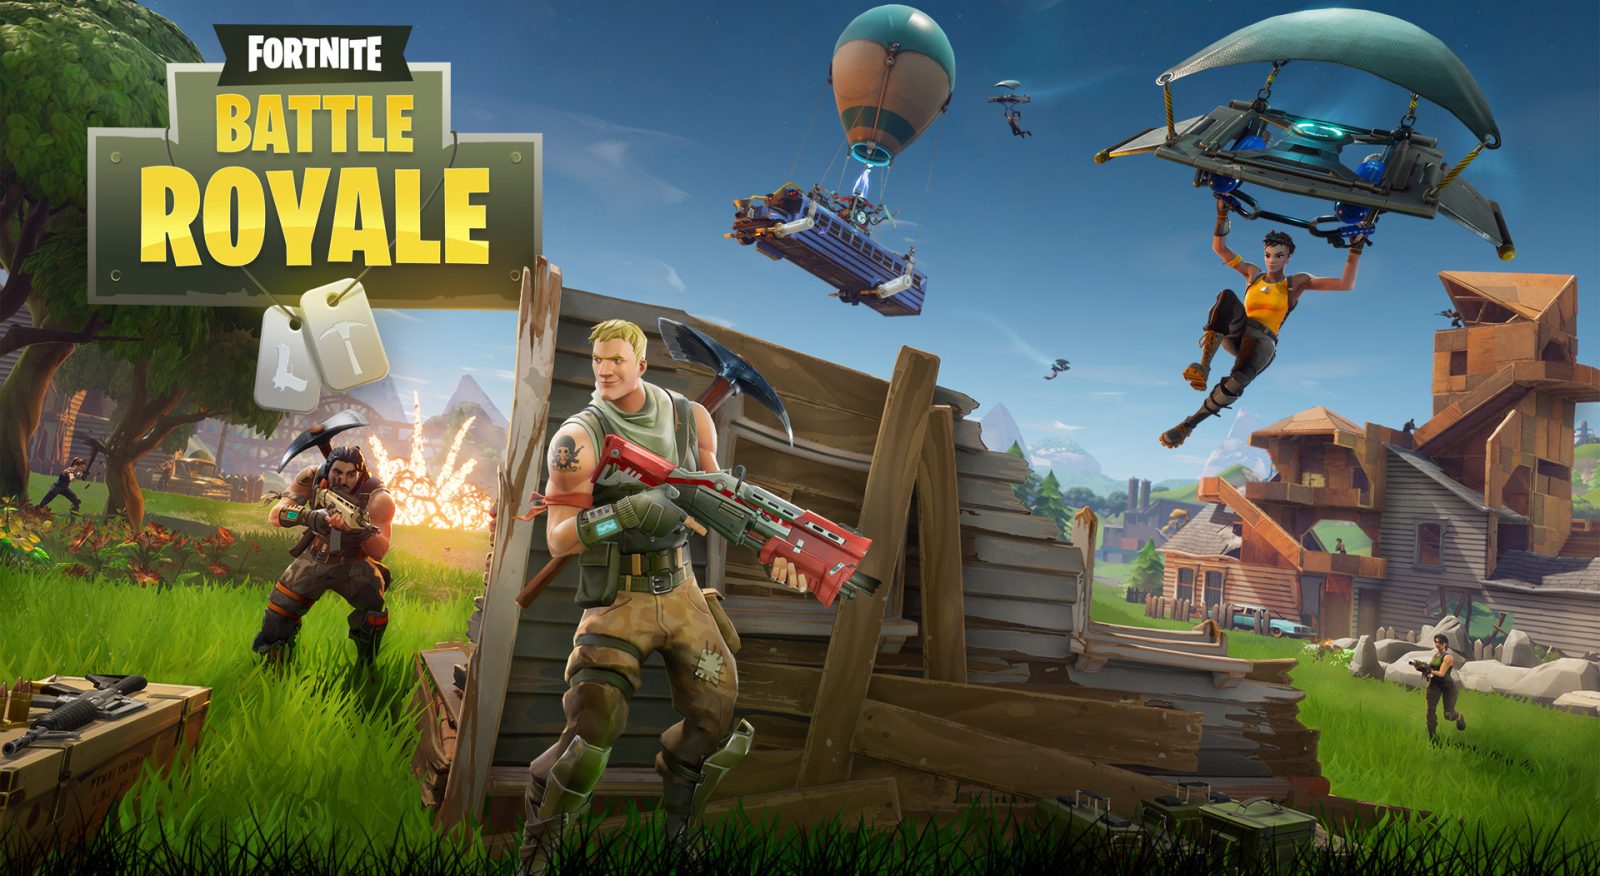 you can play fortnite on nintendo switch for free download now on the eshop - download fortnite for free on switch